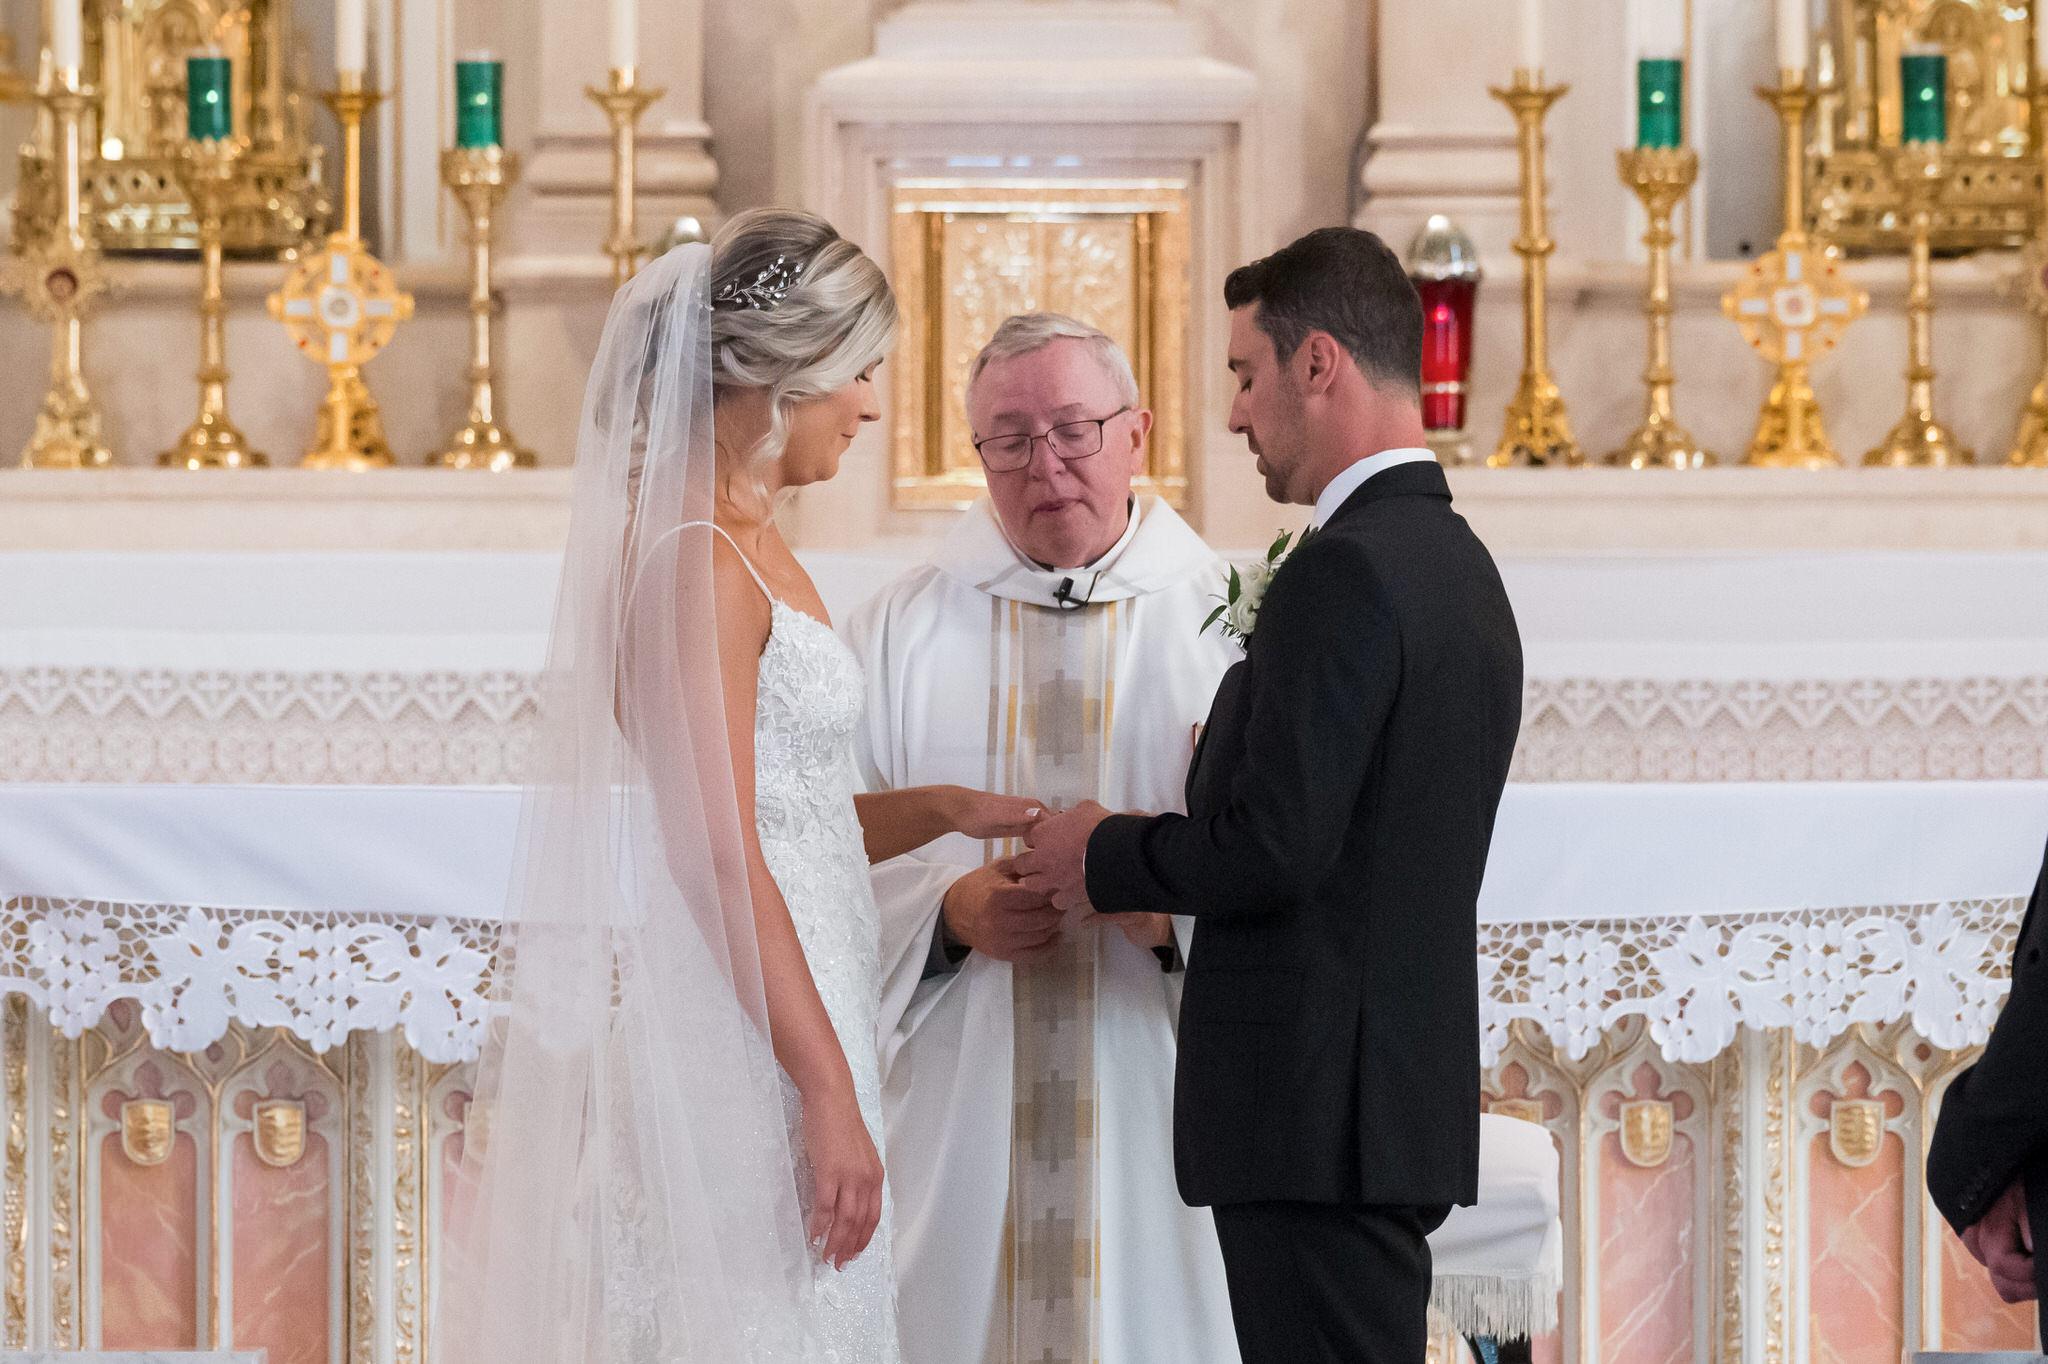 A bride and groom exchange rings at the altar of Detroit's Sweetest Heart of Mary Catholic Church on their wedding day.  